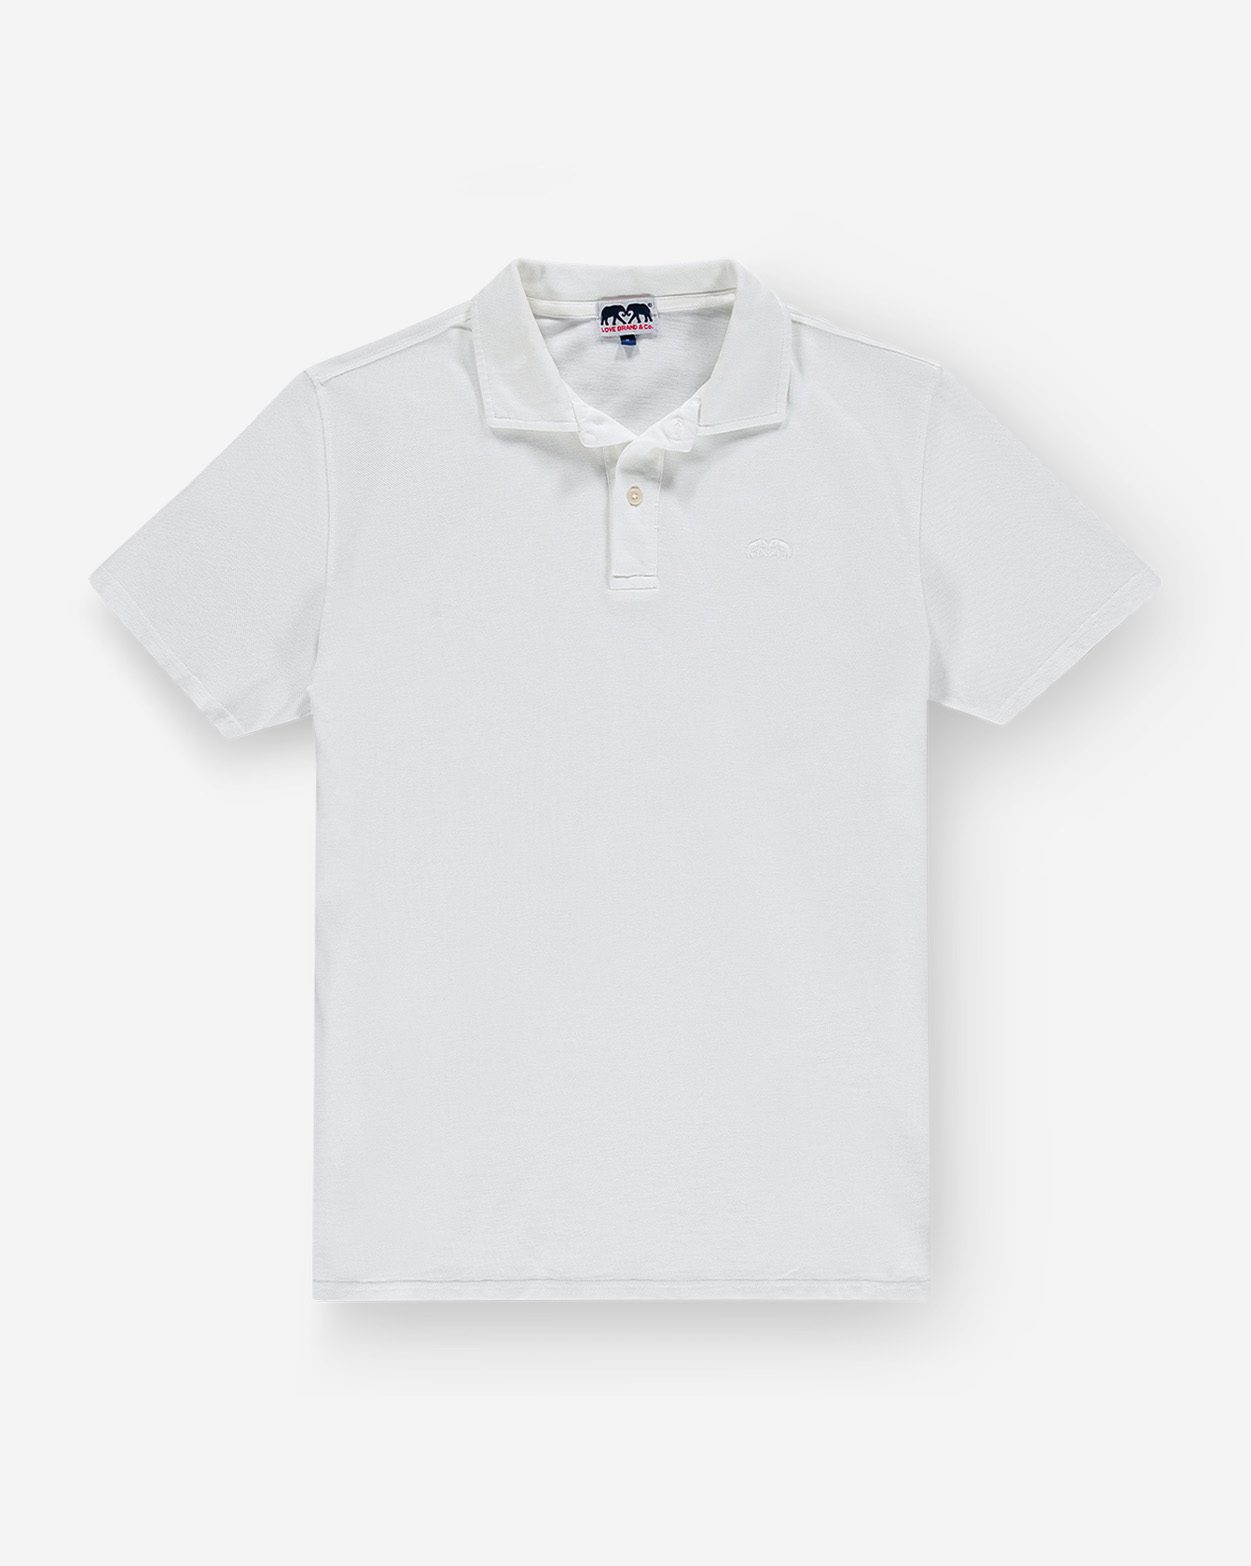 21 Best Polo Shirts for Men in 2023: Lacoste, Ralph Lauren, Todd